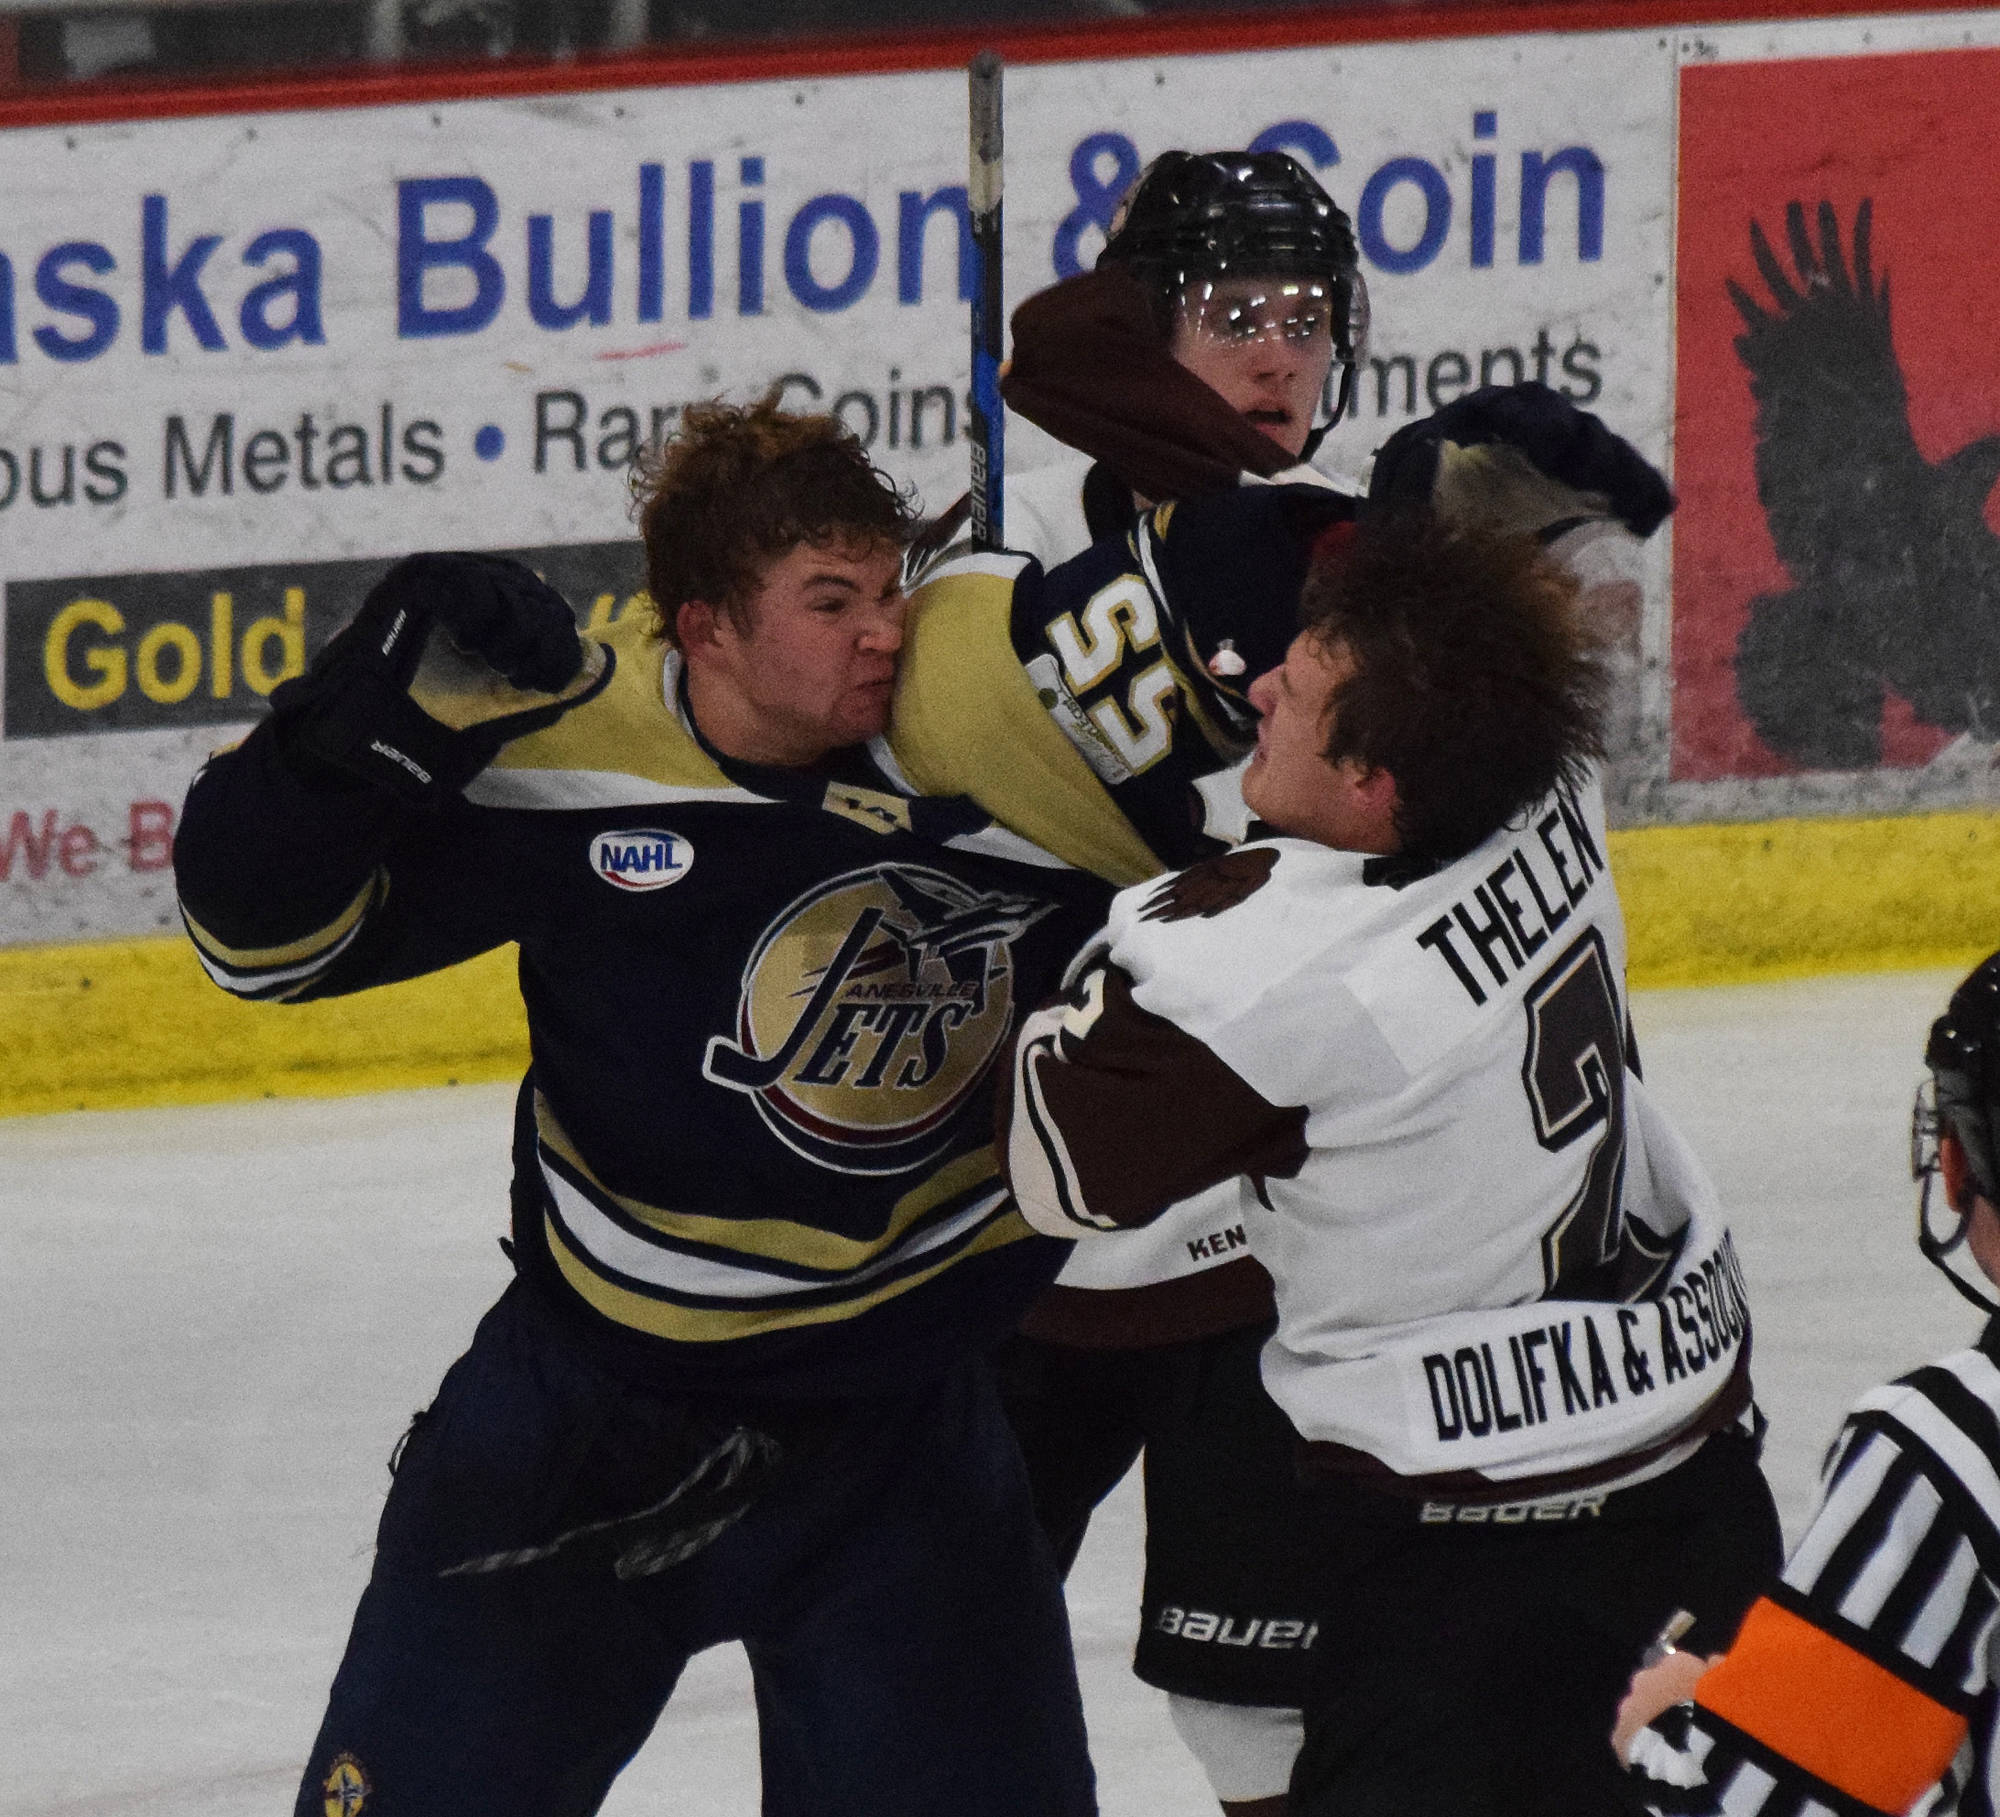 Janesville’s Grant Hindman (left) engages Kenai River’s Nate Thelen in a fight late in the second period Saturday, Oct. 12, 2019, at the Soldotna Regional Sports Complex in Soldotna, Alaska. (Photo by Joey Klecka/Peninsula Clarion)